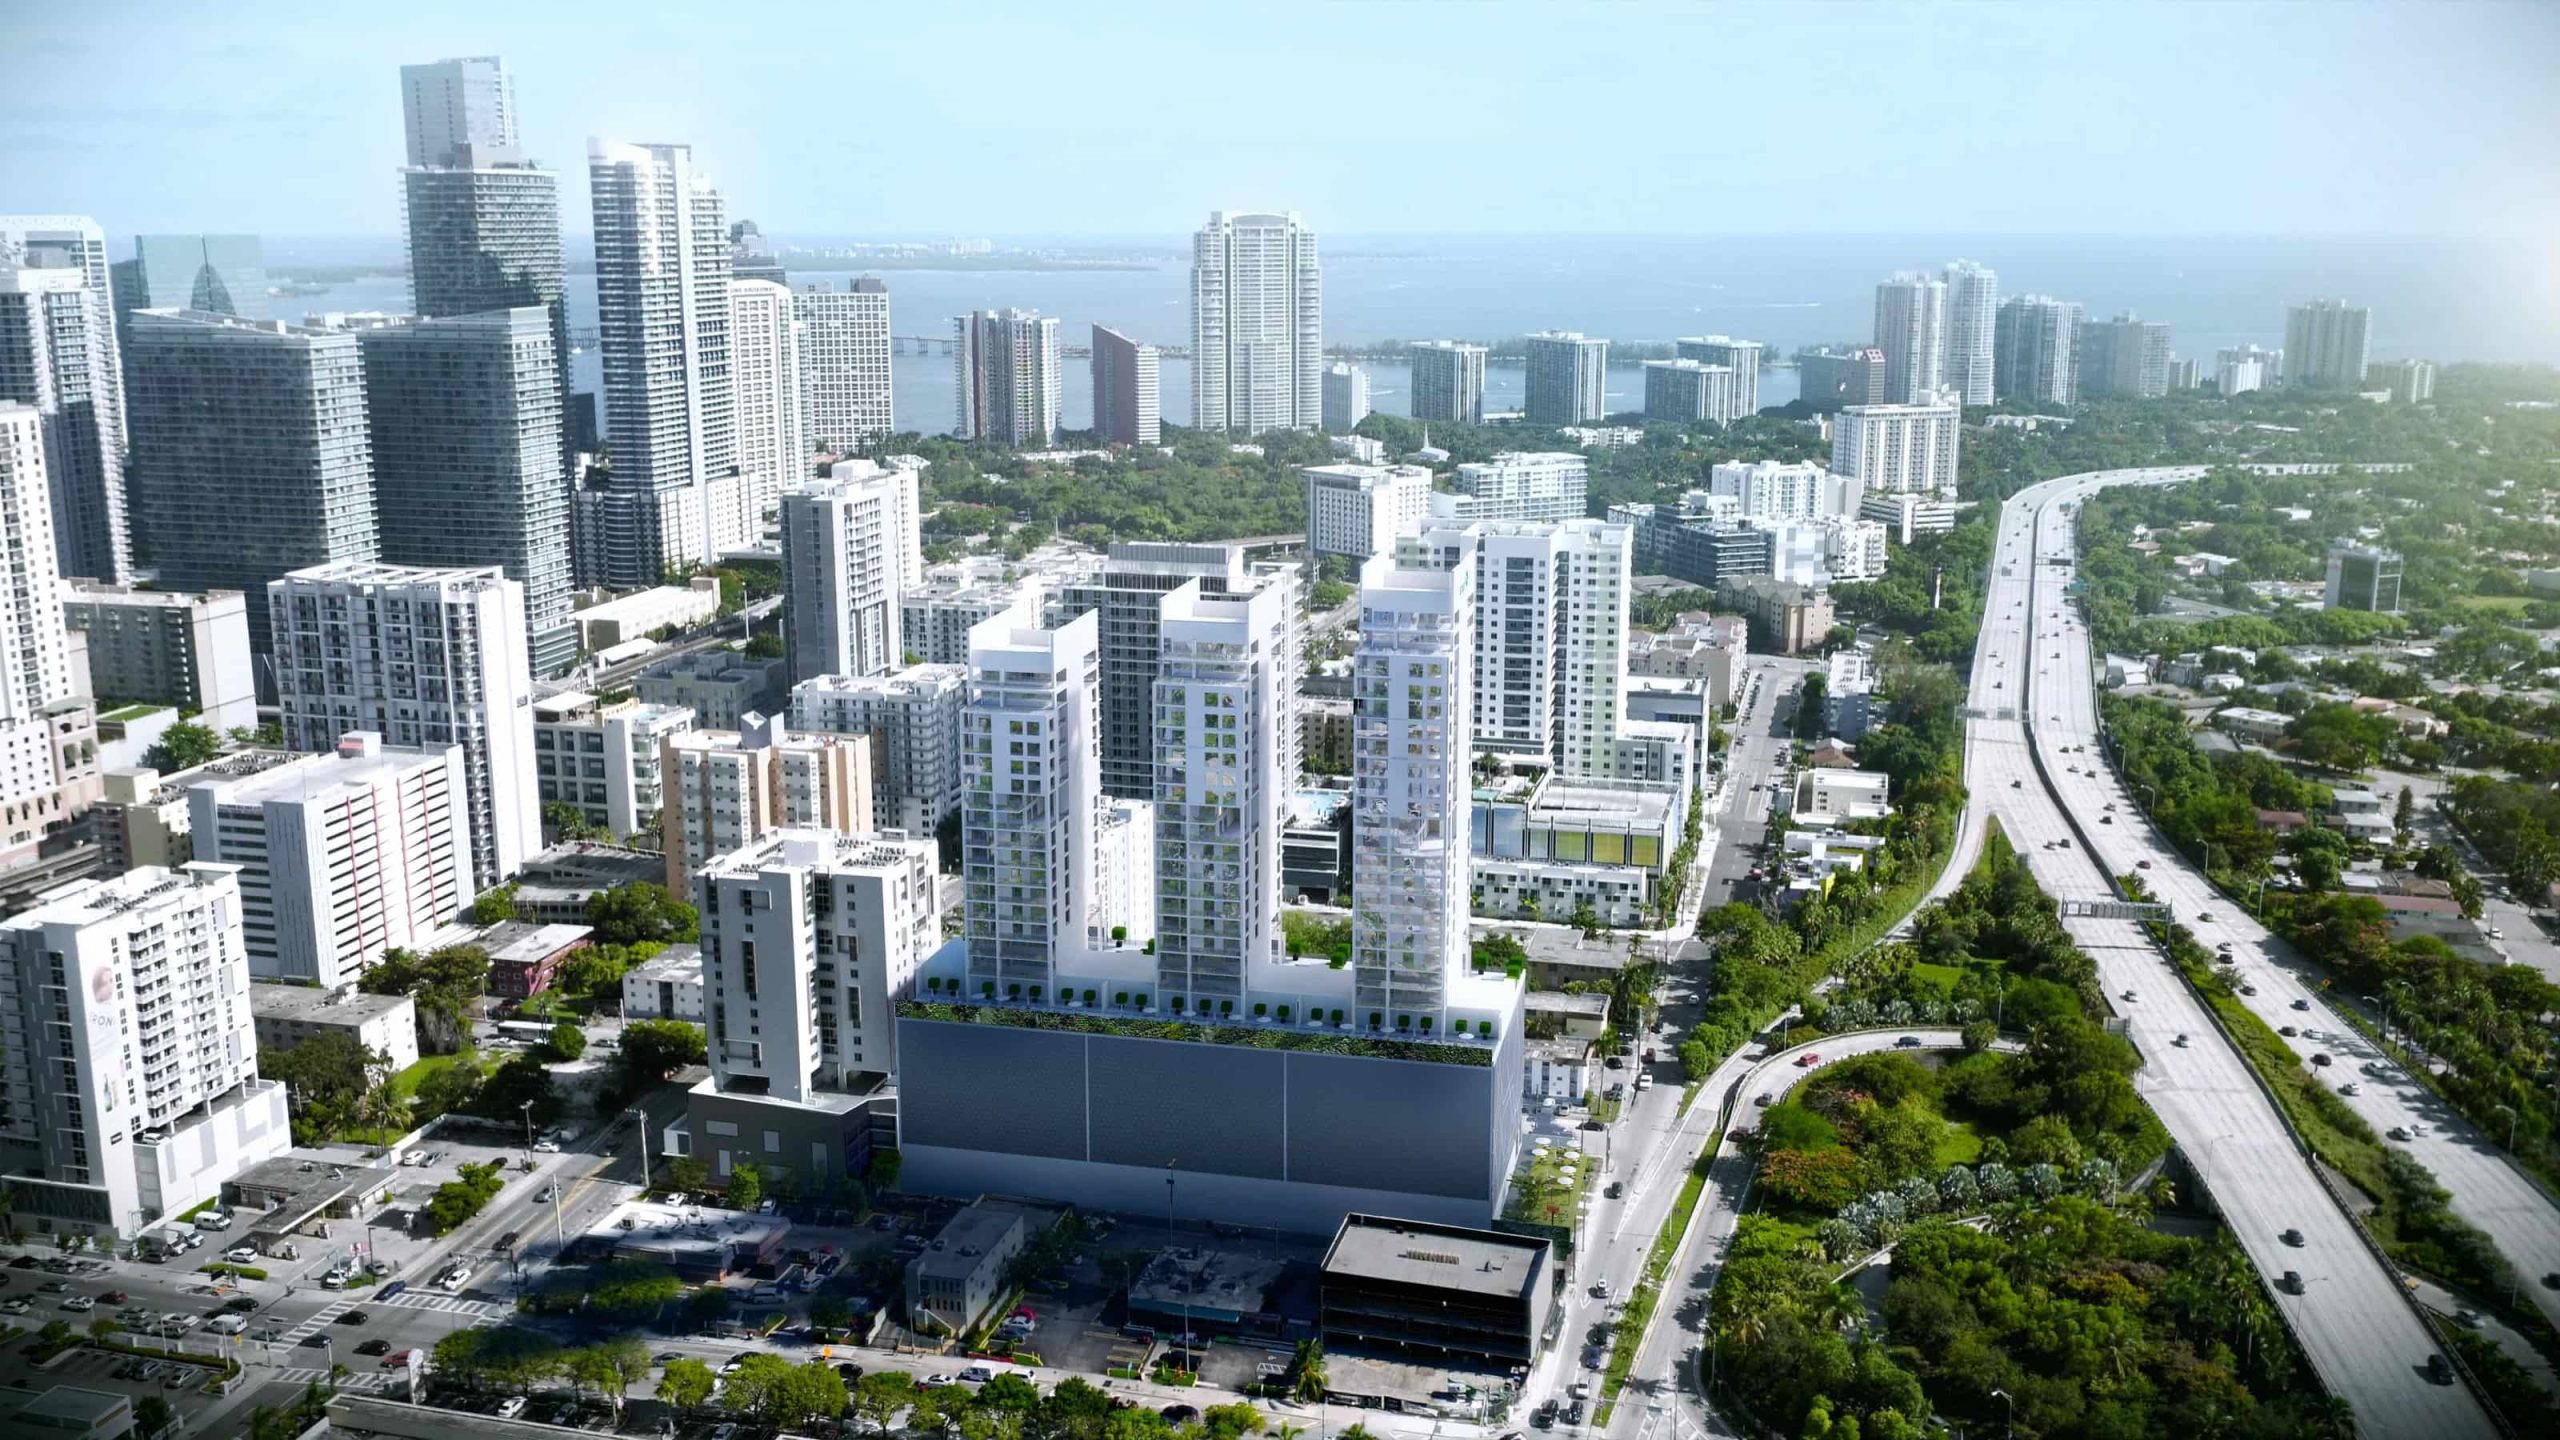 Smart Brickell is 35% sold and plans to break ground in april